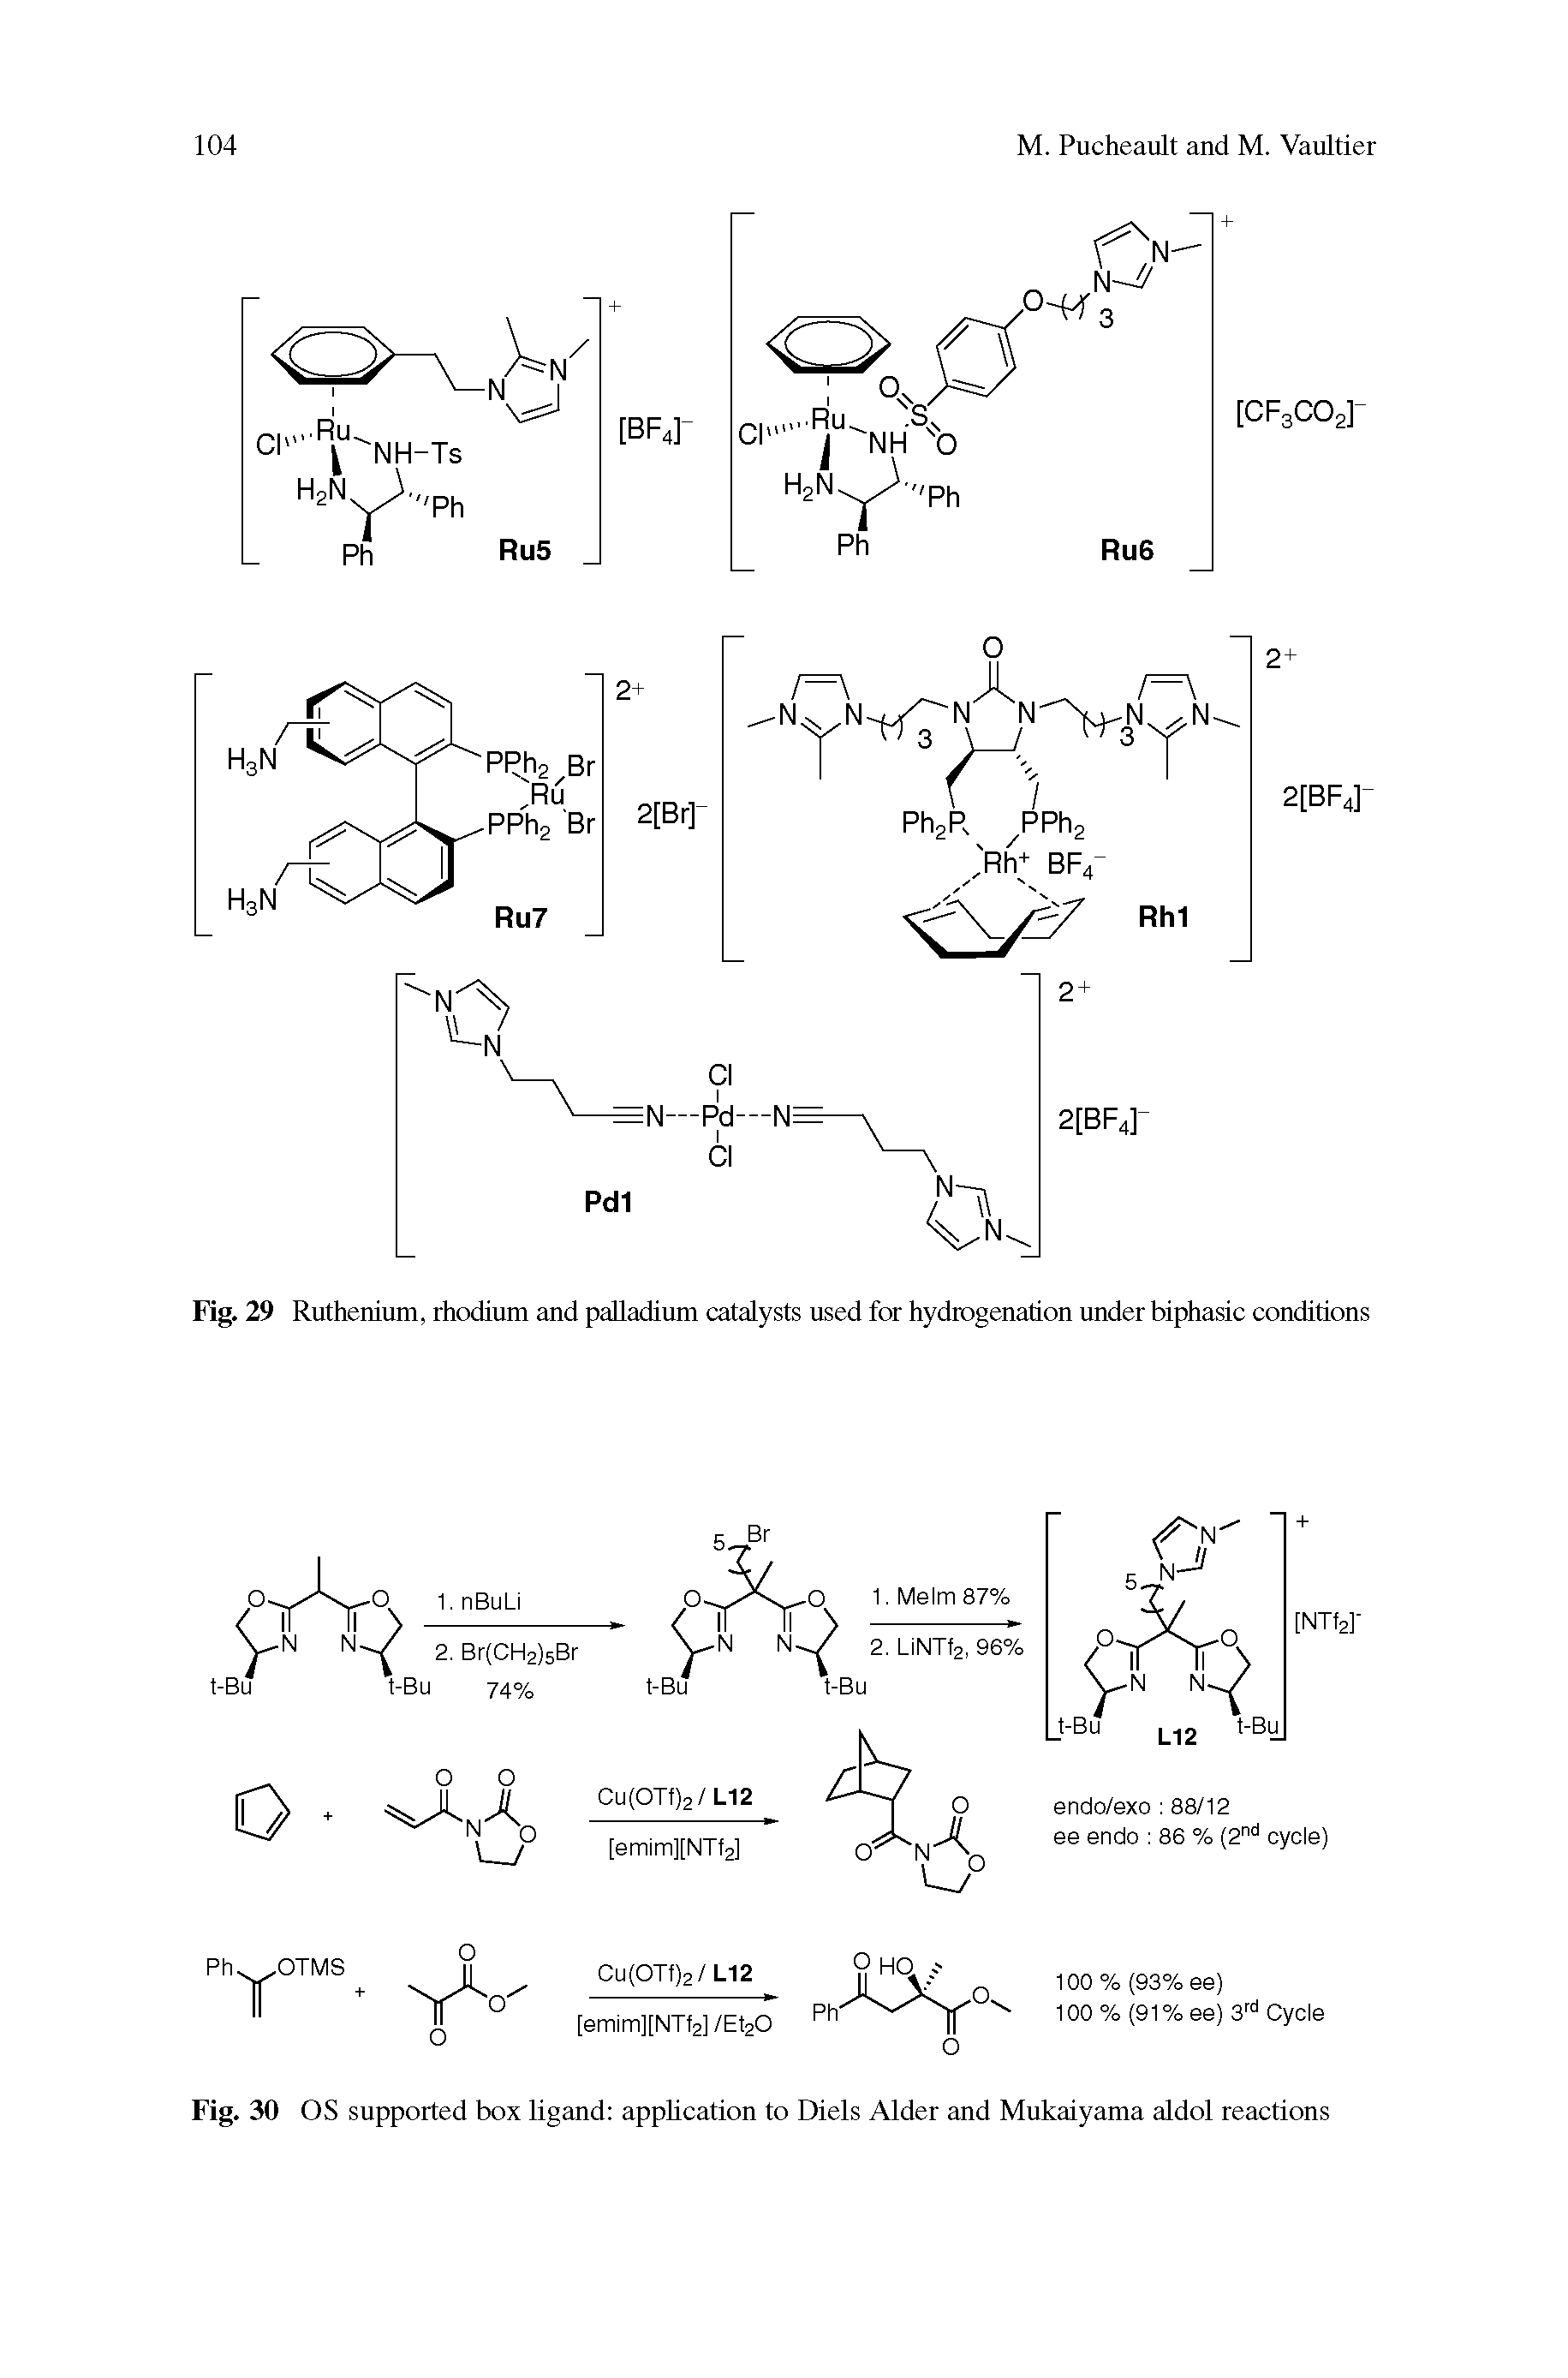 Fig. 30 OS supported box ligand application to Diels Alder and Mukaiyama aldol reactions...